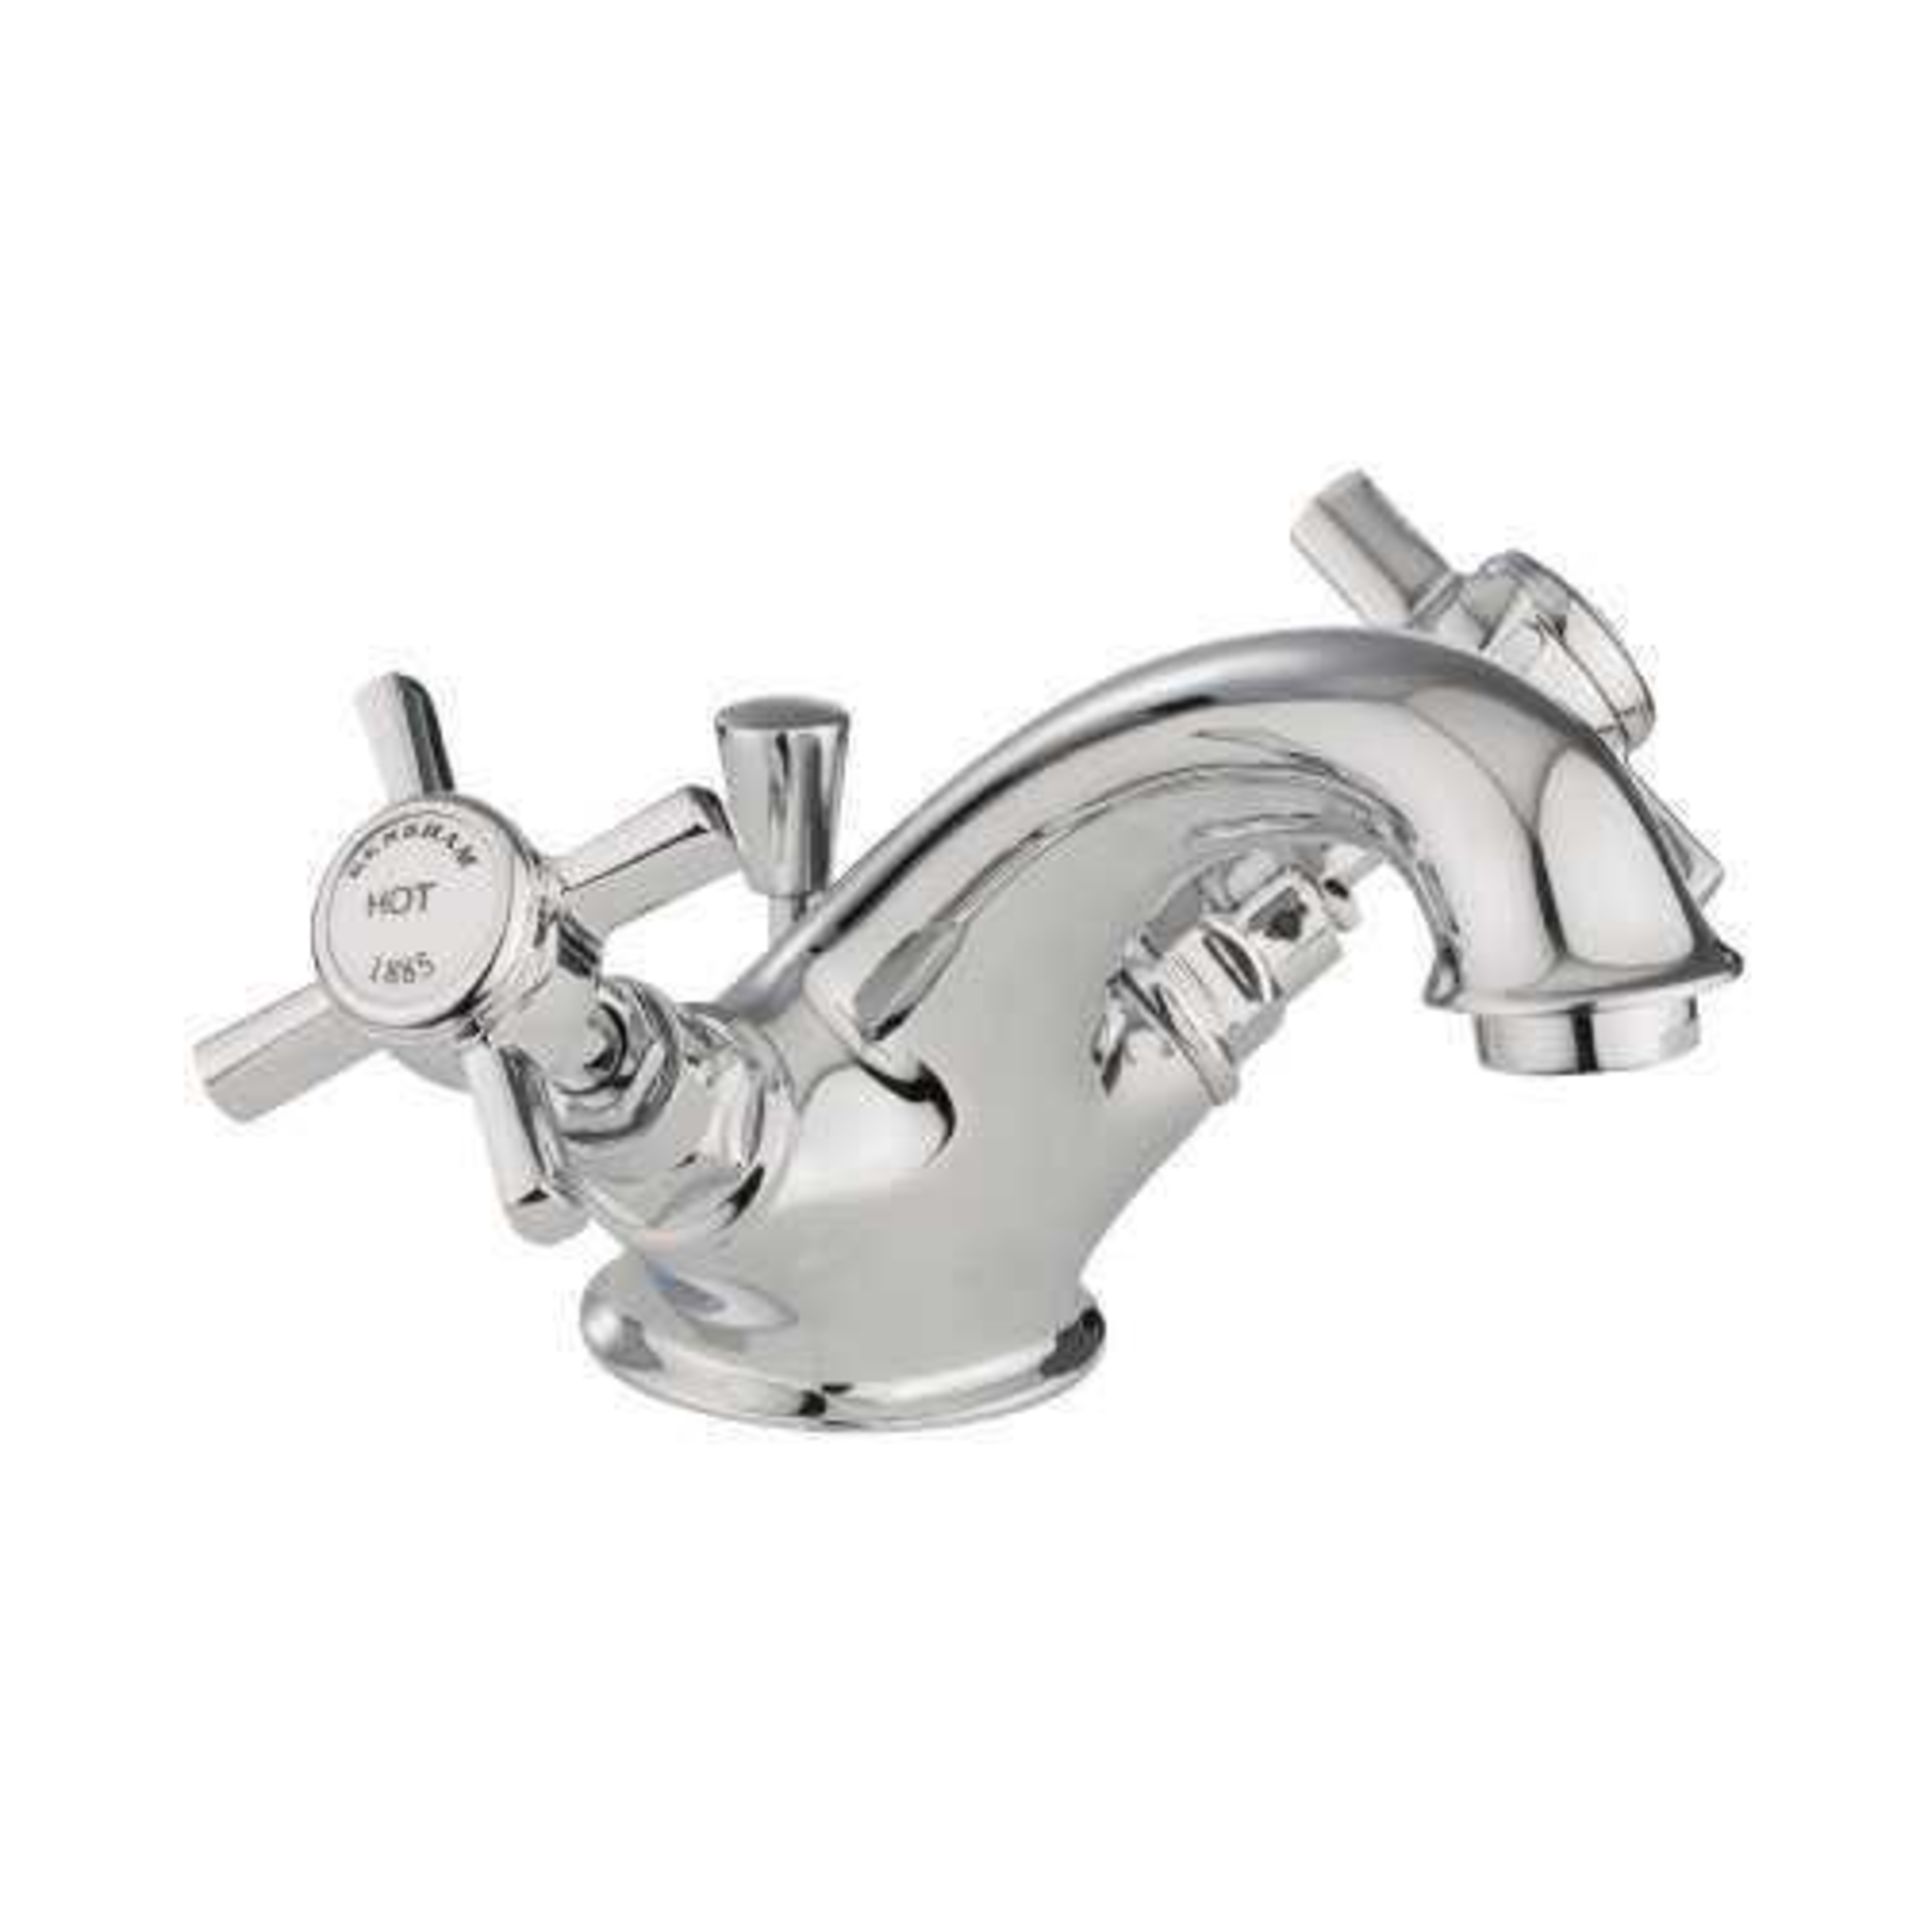 Rrp £200 Boxed Bensham Traditional Basin Mixer Tap With Pop Up Waste - Image 2 of 2